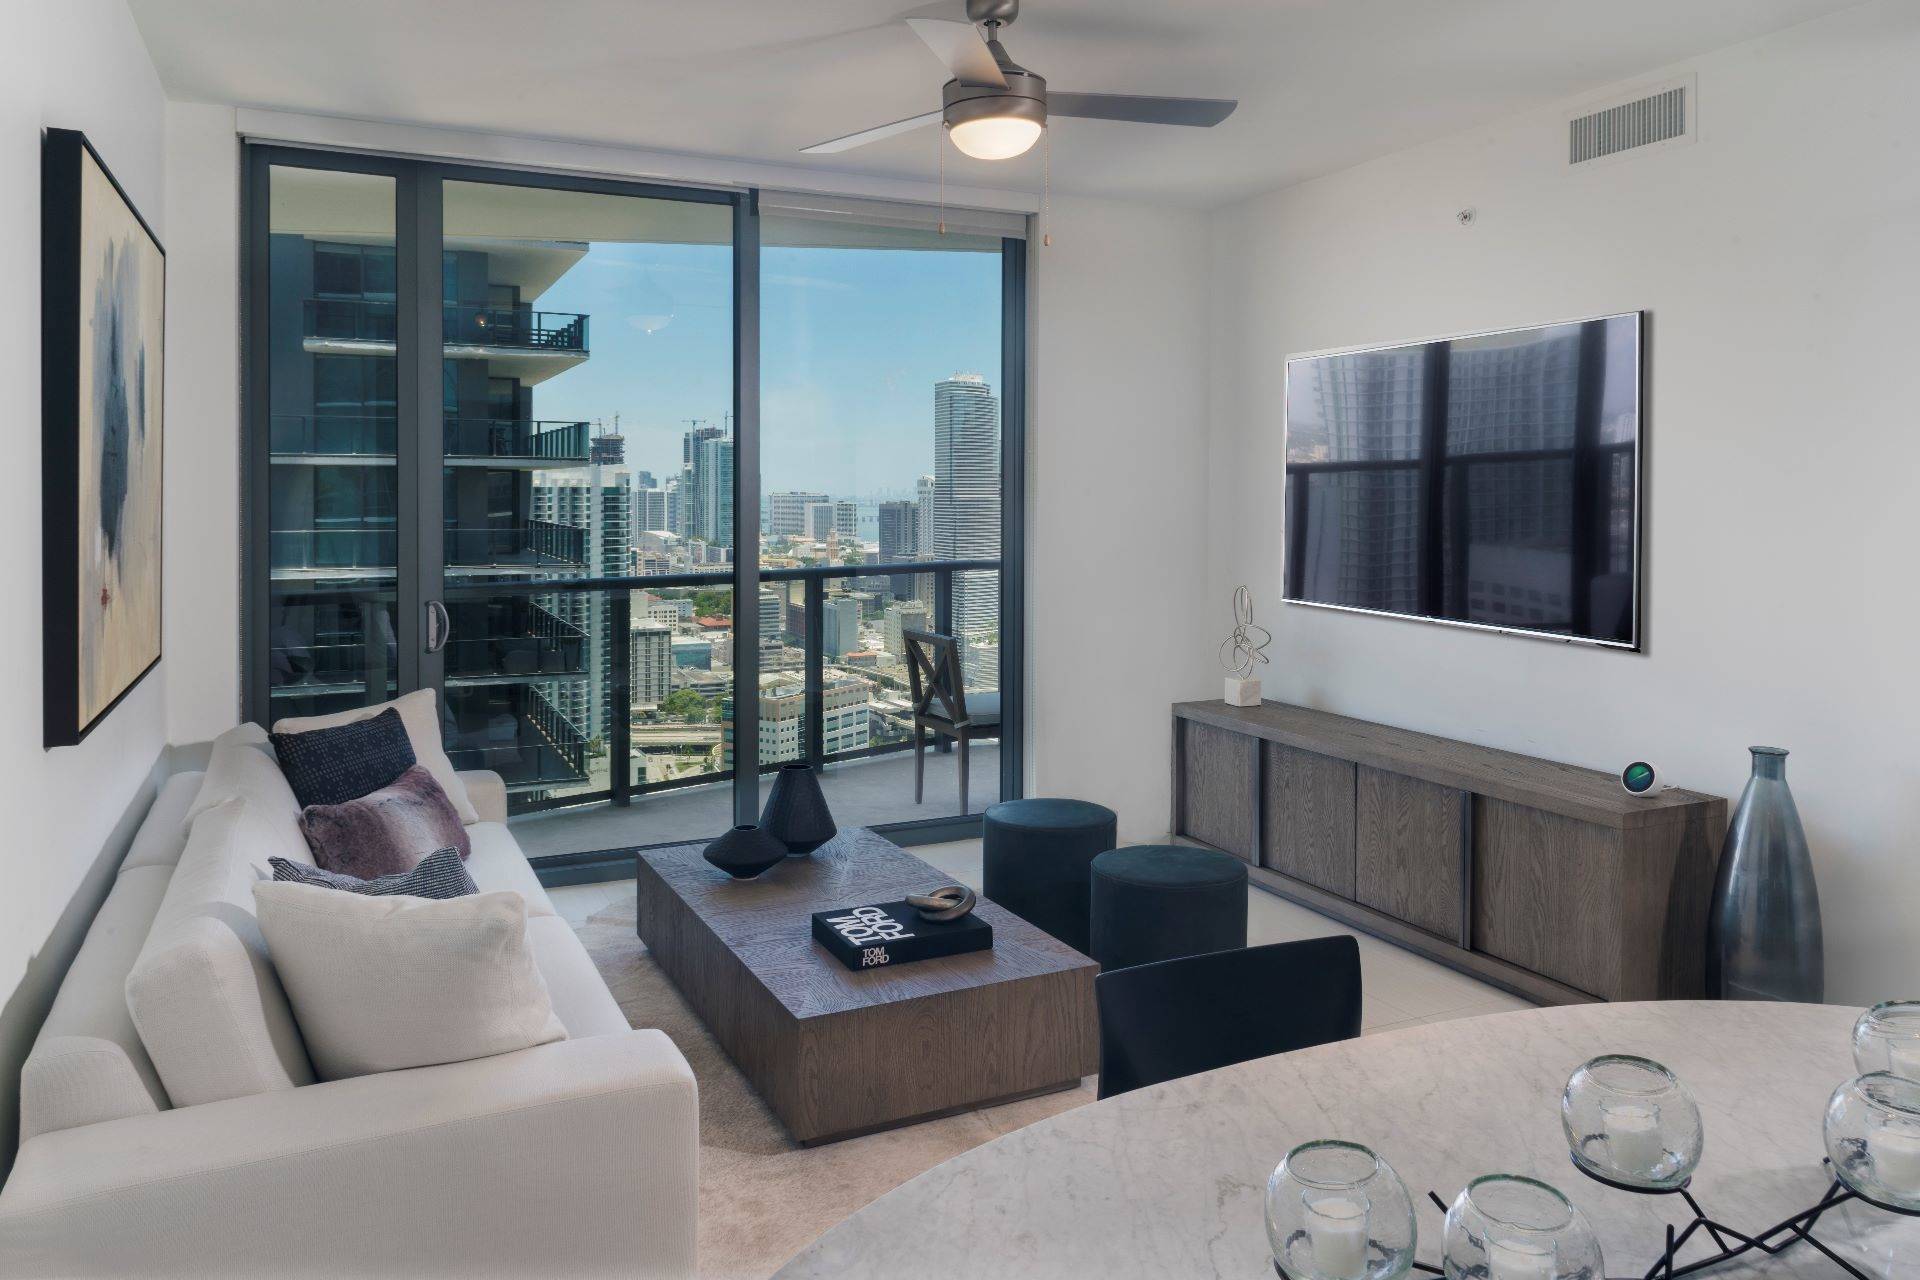 2 MONTHS FREE| Accessible Brickell| Cozy and Classy 1br/1ba| 809 SF